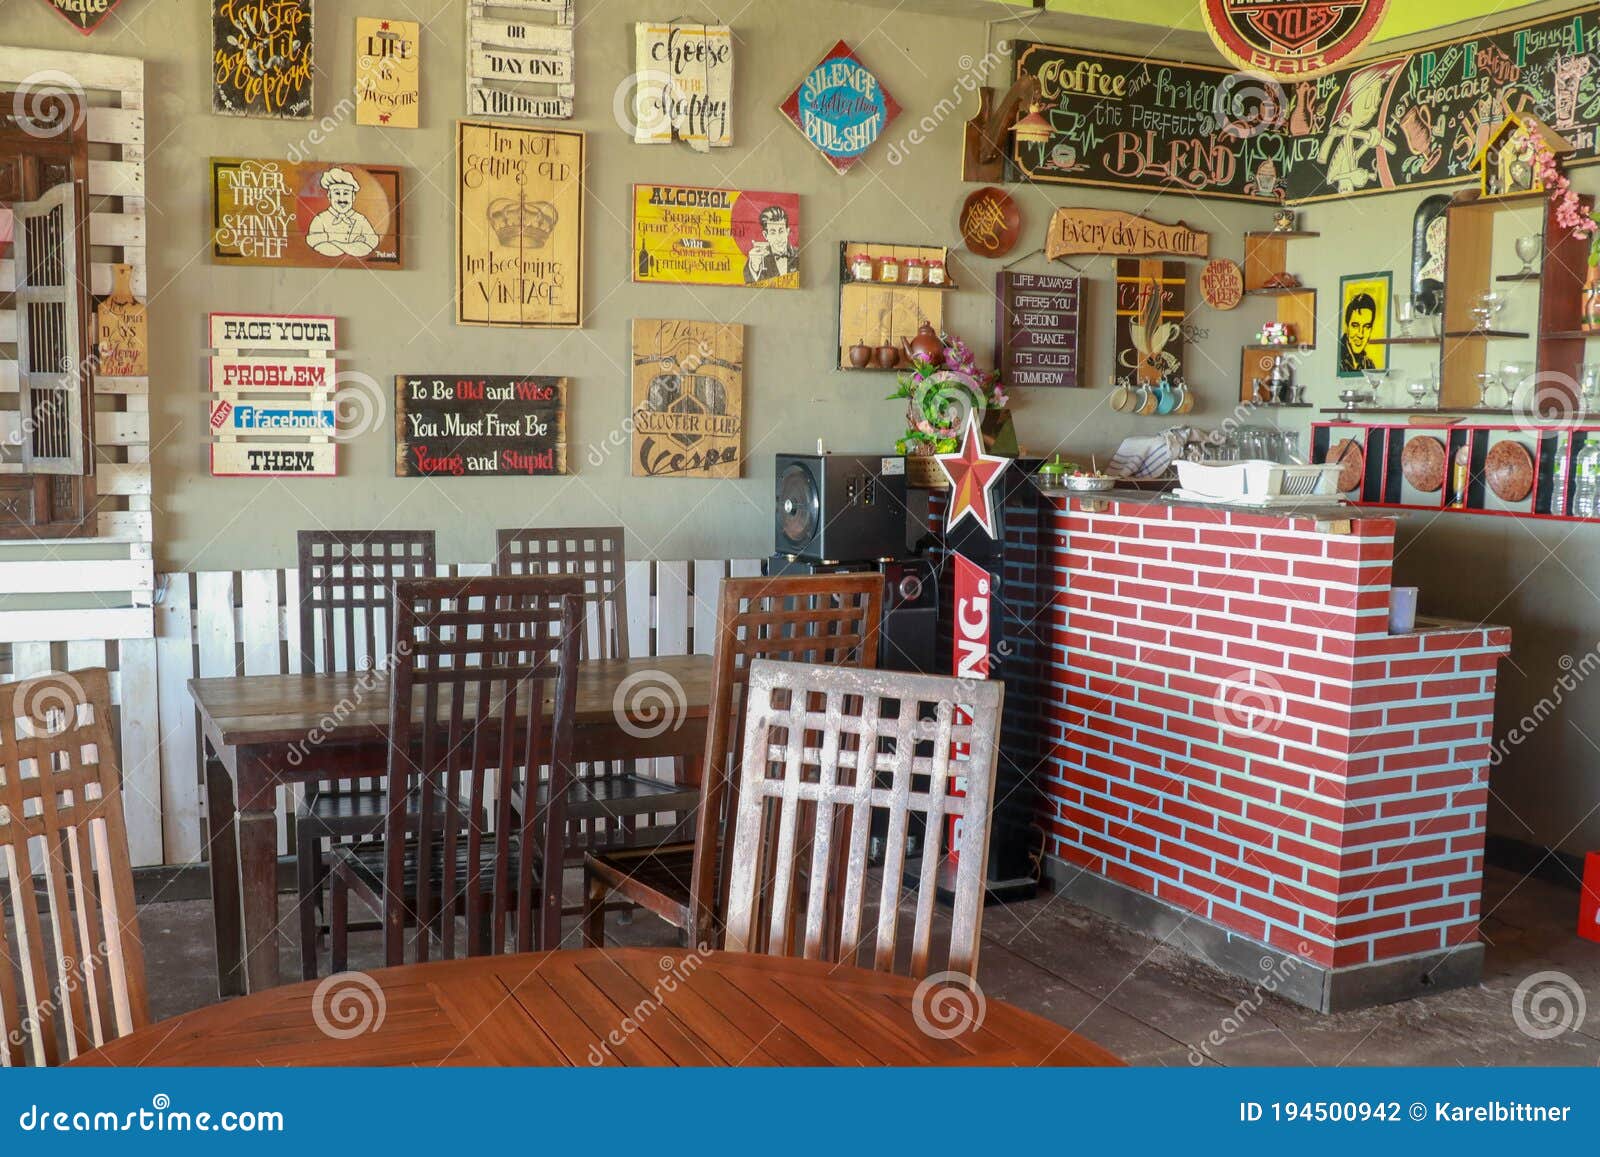 Interior of an Old Tavern, Traditional Style, Souvenirs and Old Wooden